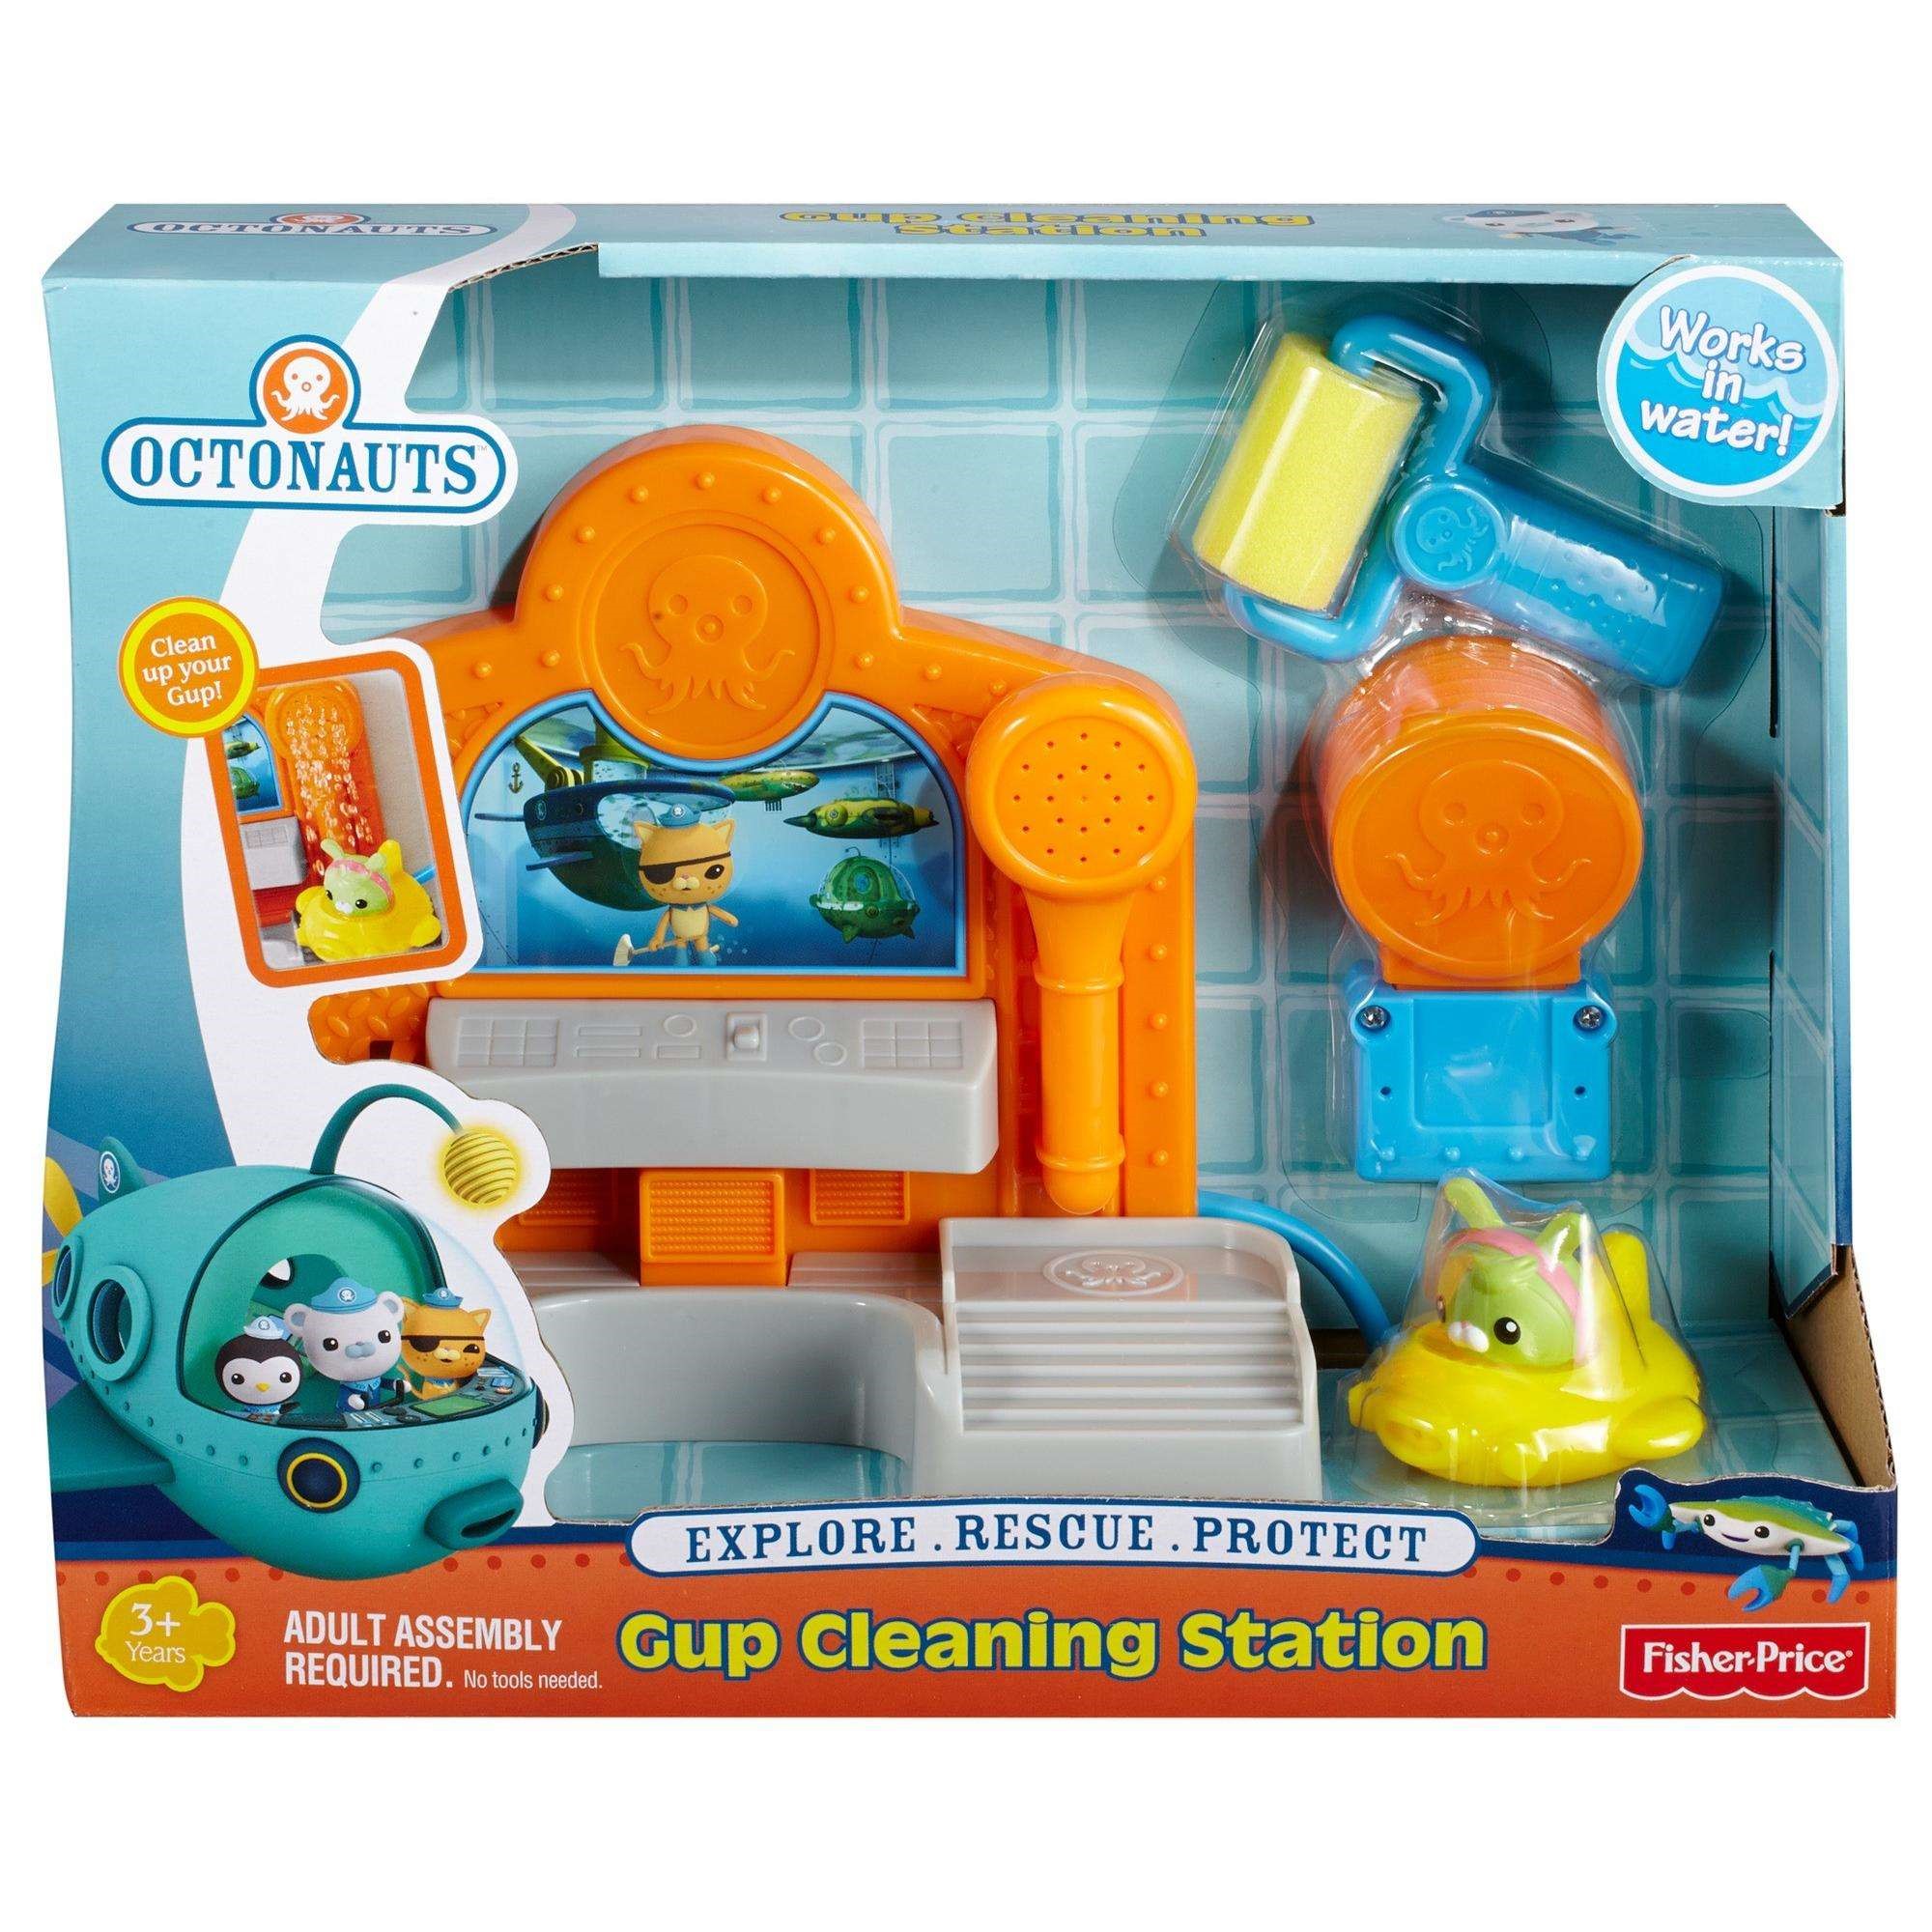 Fisher-Price Octonauts Gup Cleaning Station Multi-Colored - image 3 of 8